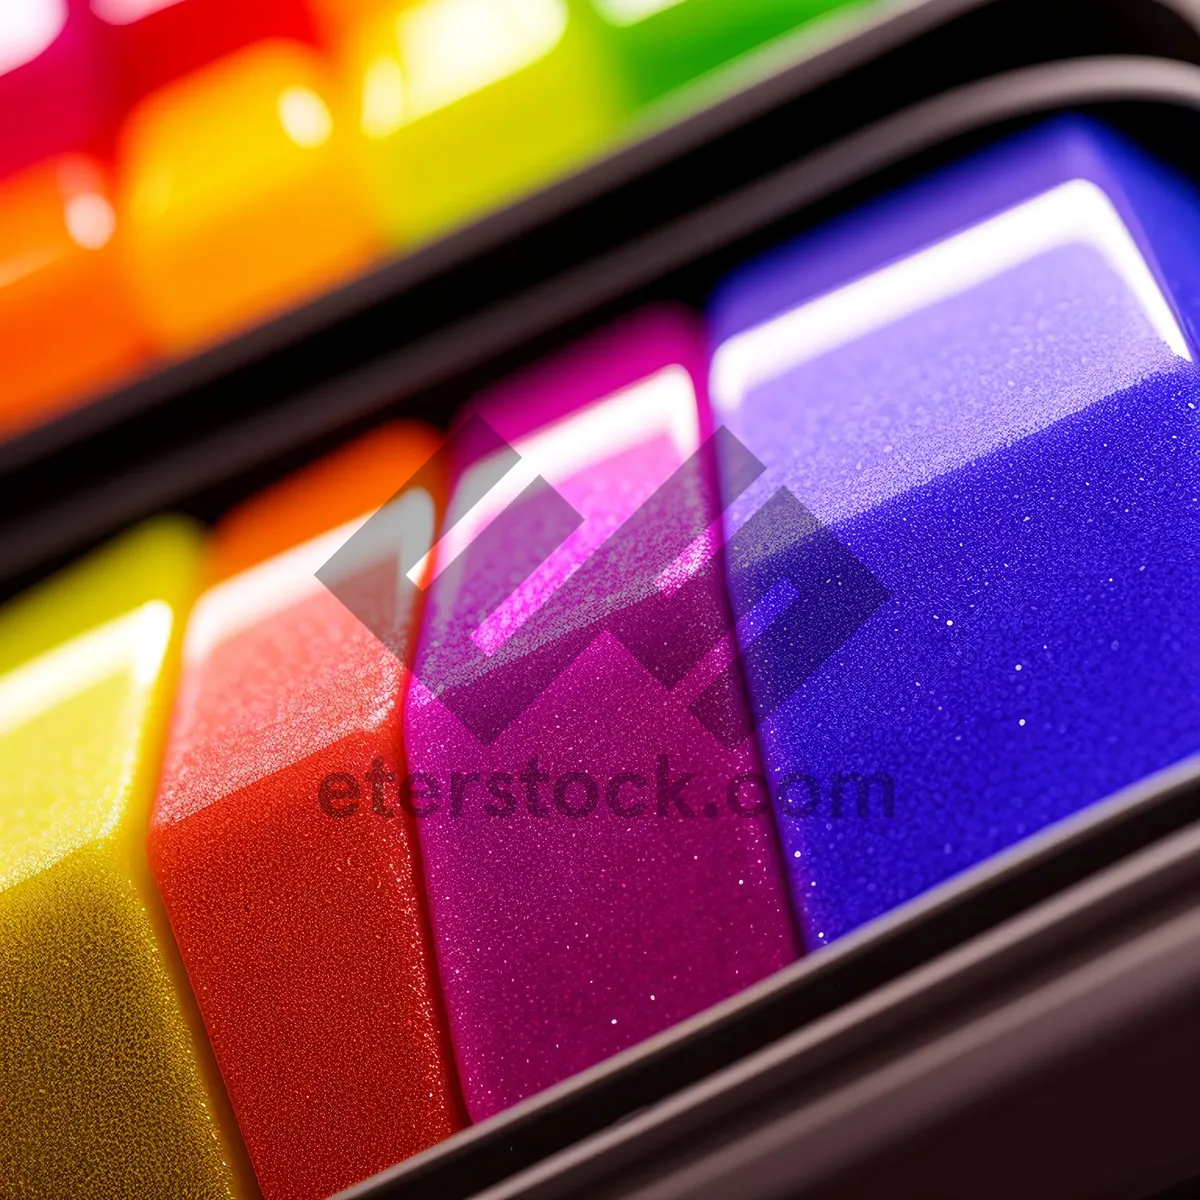 Picture of Digital Key: Sleek Keyboard Button Illuminated in Vibrant 3D Colors